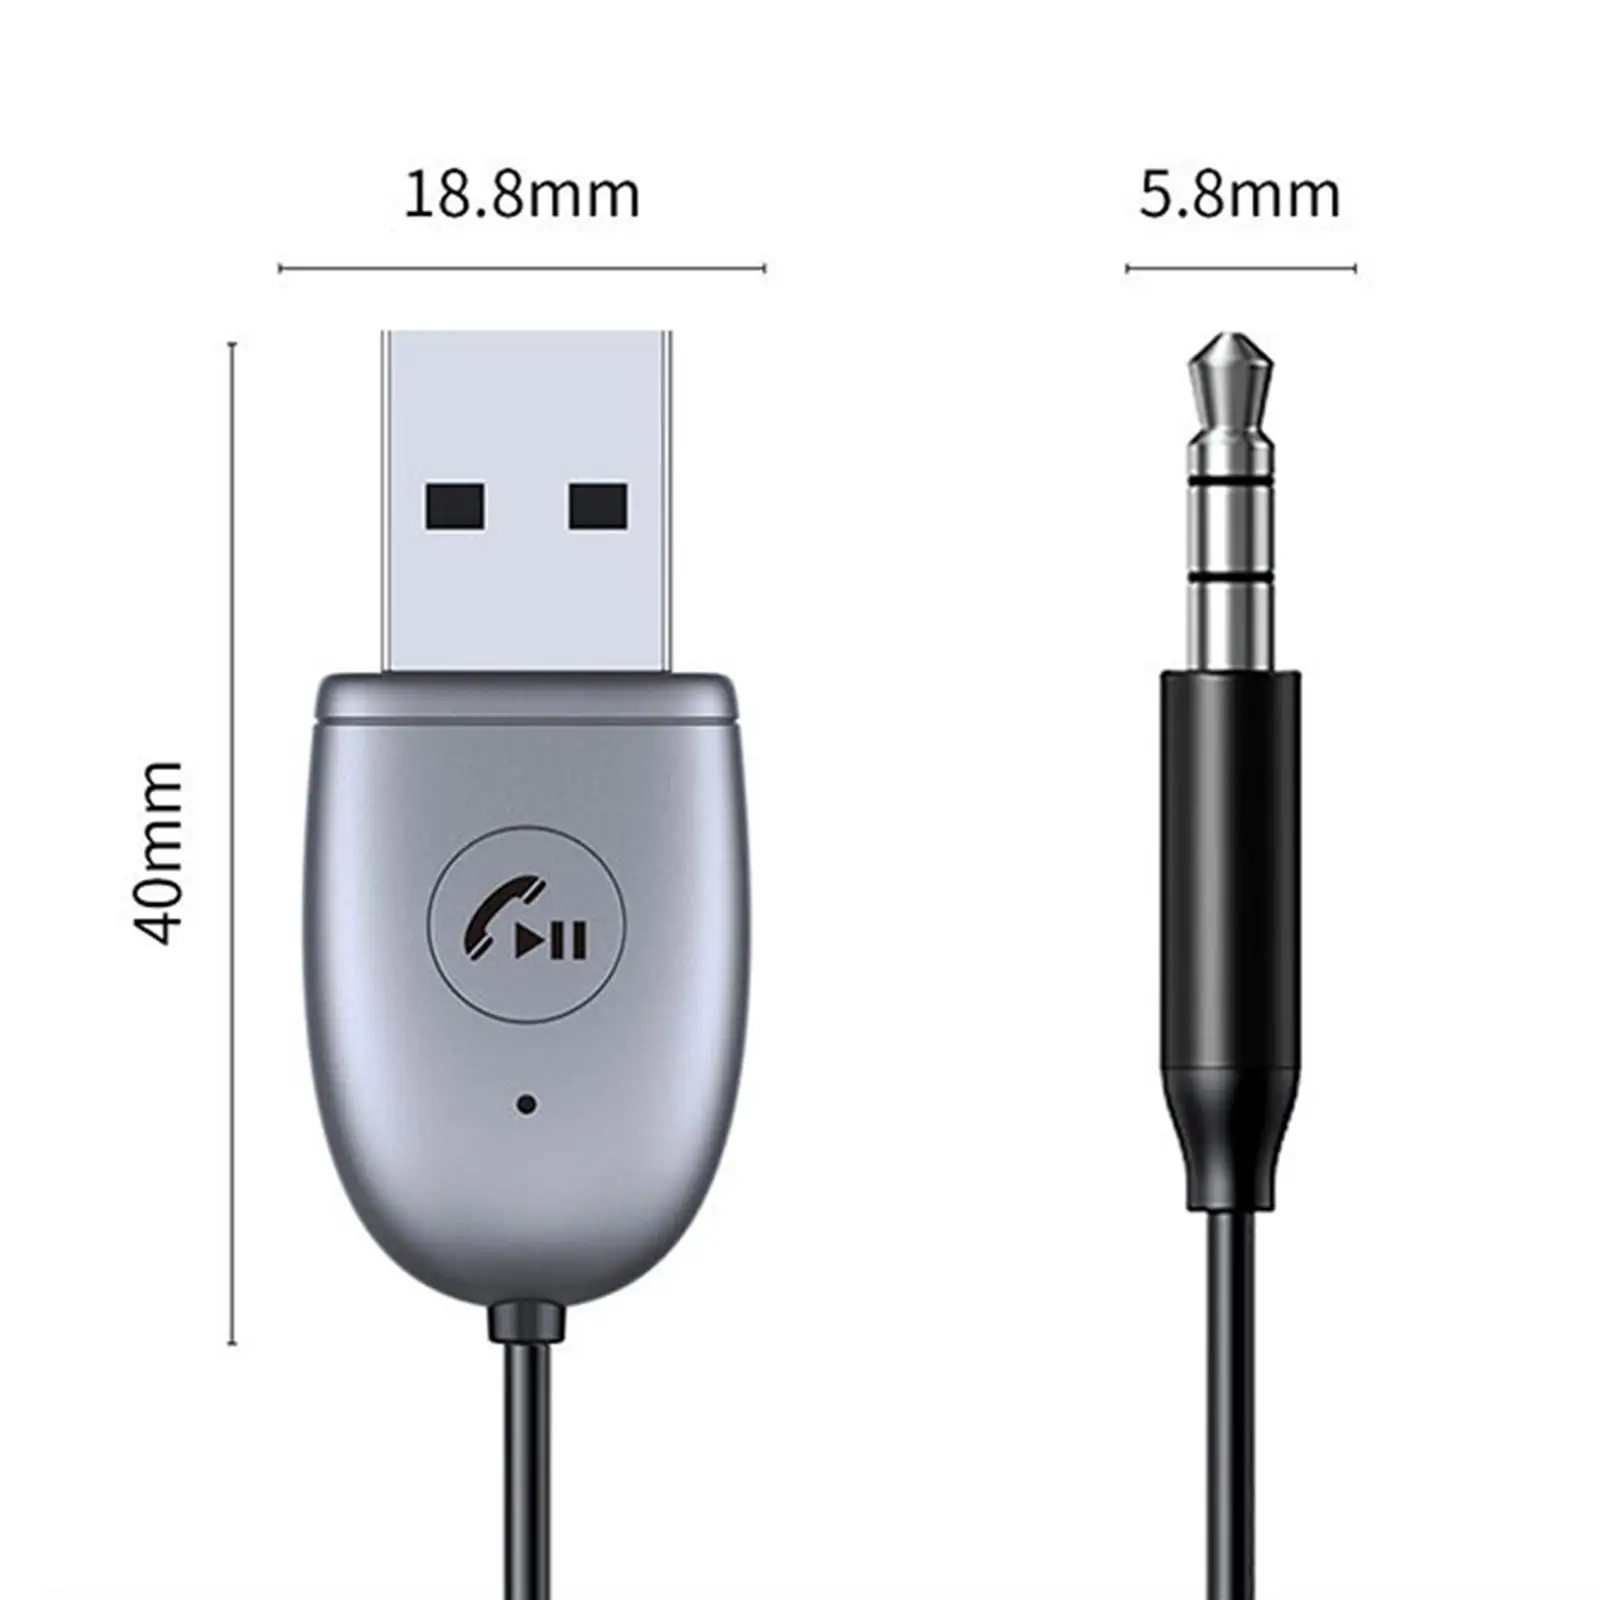 AUX Audio 5.0 Adapter AUX Input Adapter Audio Receptor Retractable 0.4-1.2M Hands Free Calls Wired AUX Audio Music Receiver